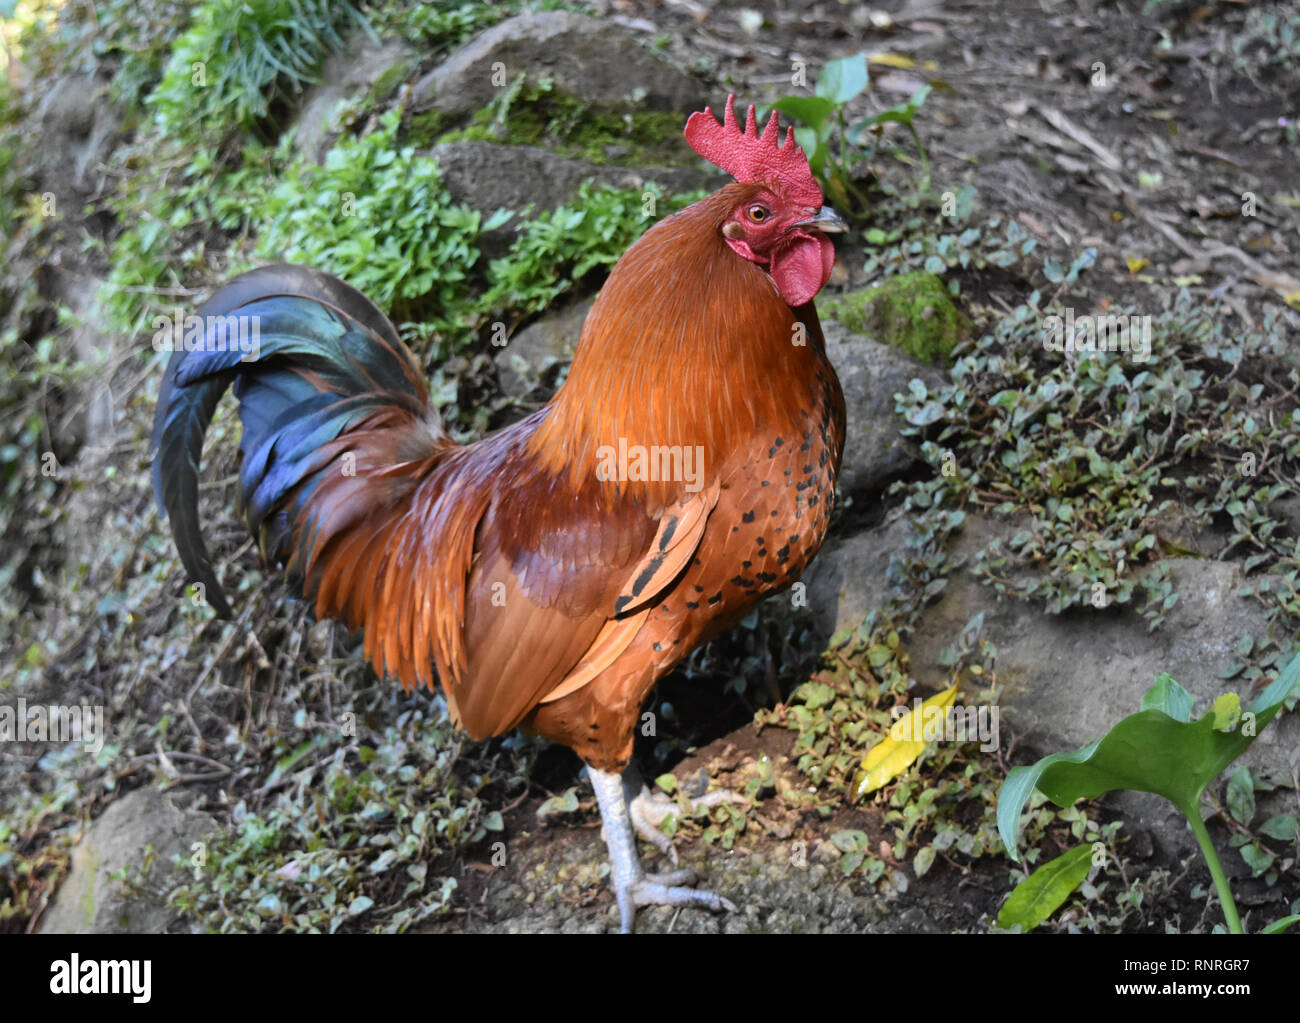 Ginger Rooster With The Red Crest And Wattle Stock Photo, Picture and  Royalty Free Image. Image 655406.